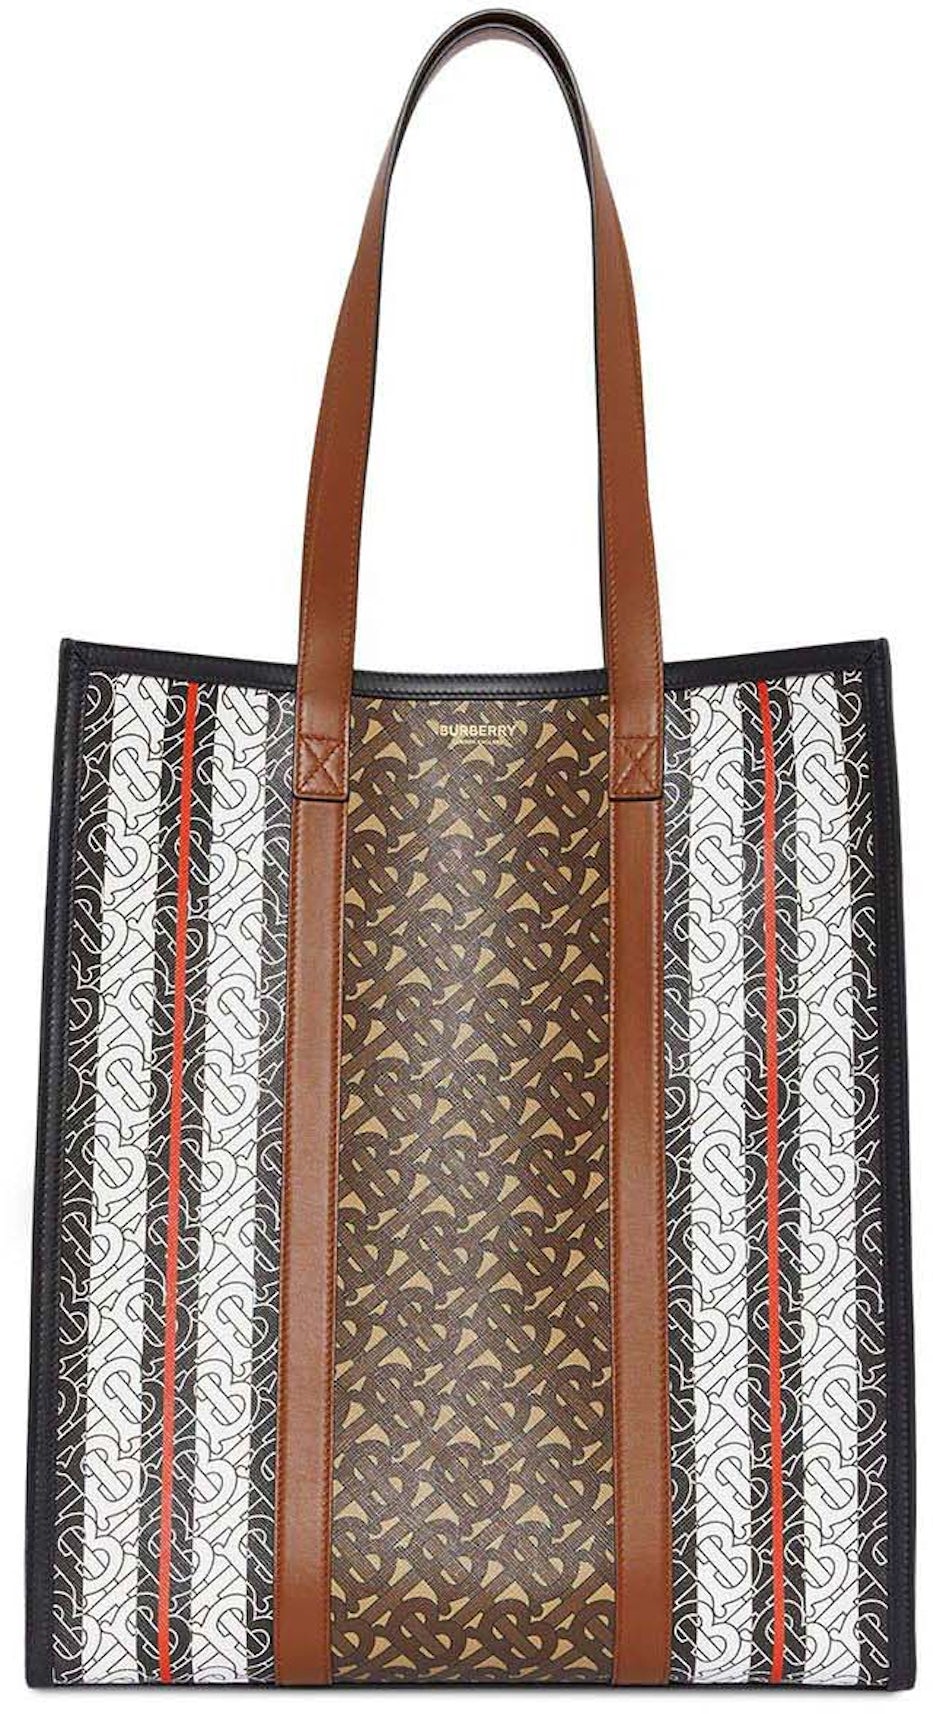 BURBERRY: Portrait bag in E-canvas with monogram print - Brown